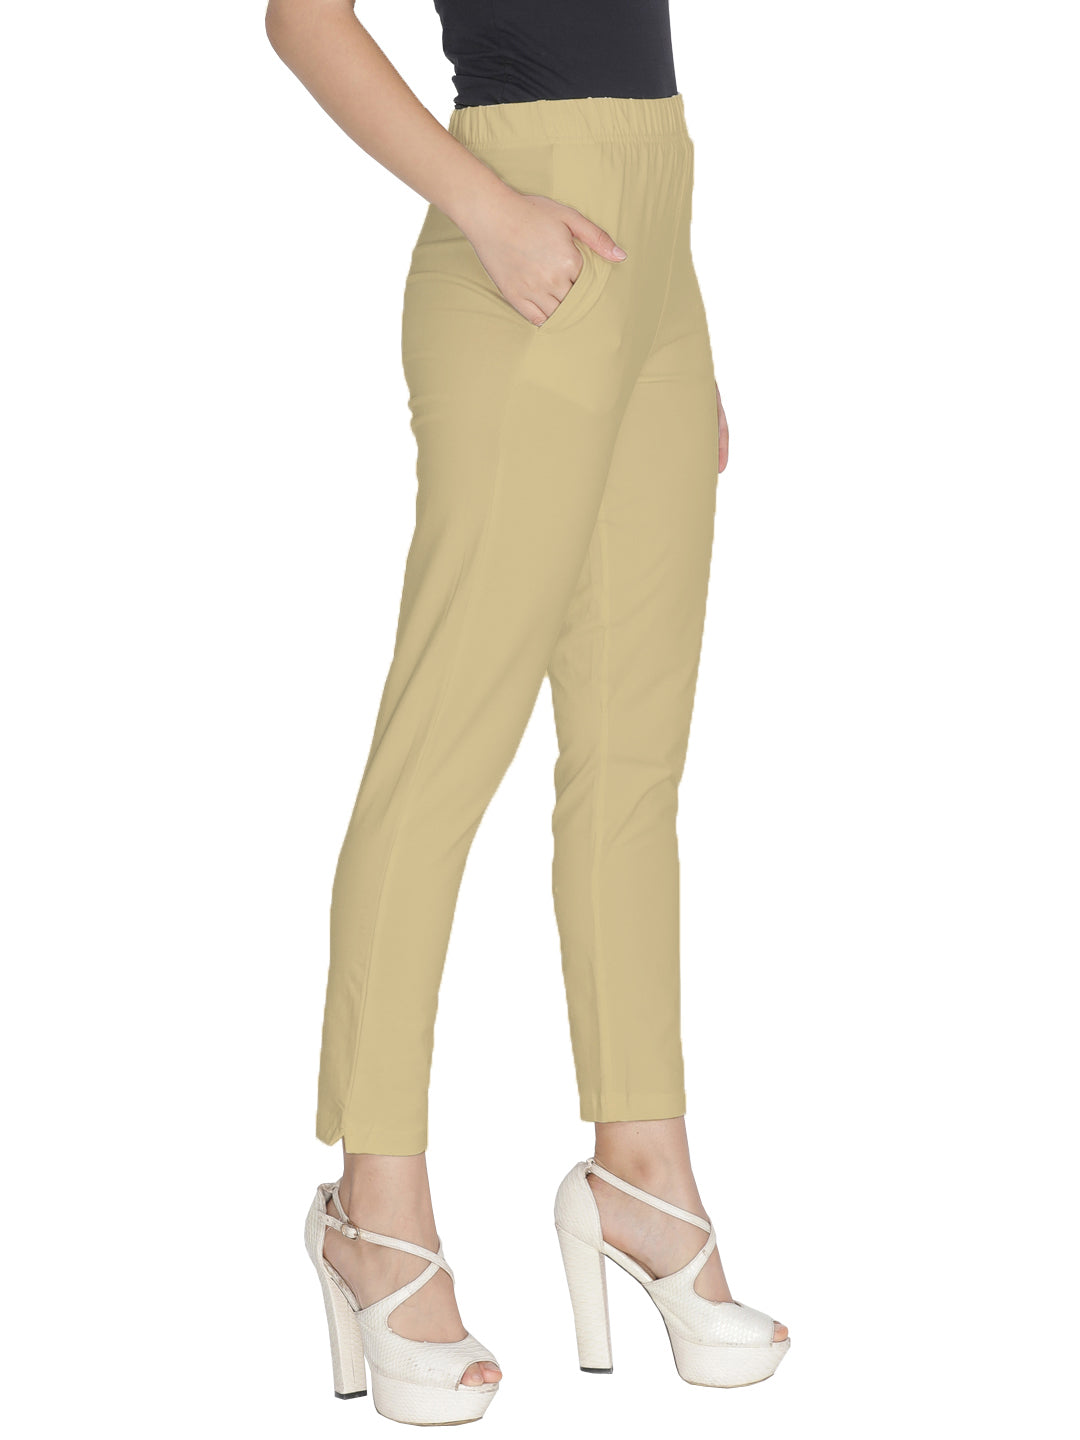 Cream Ribbed Pants - Women's Loungewear for Fall | ROOLEE